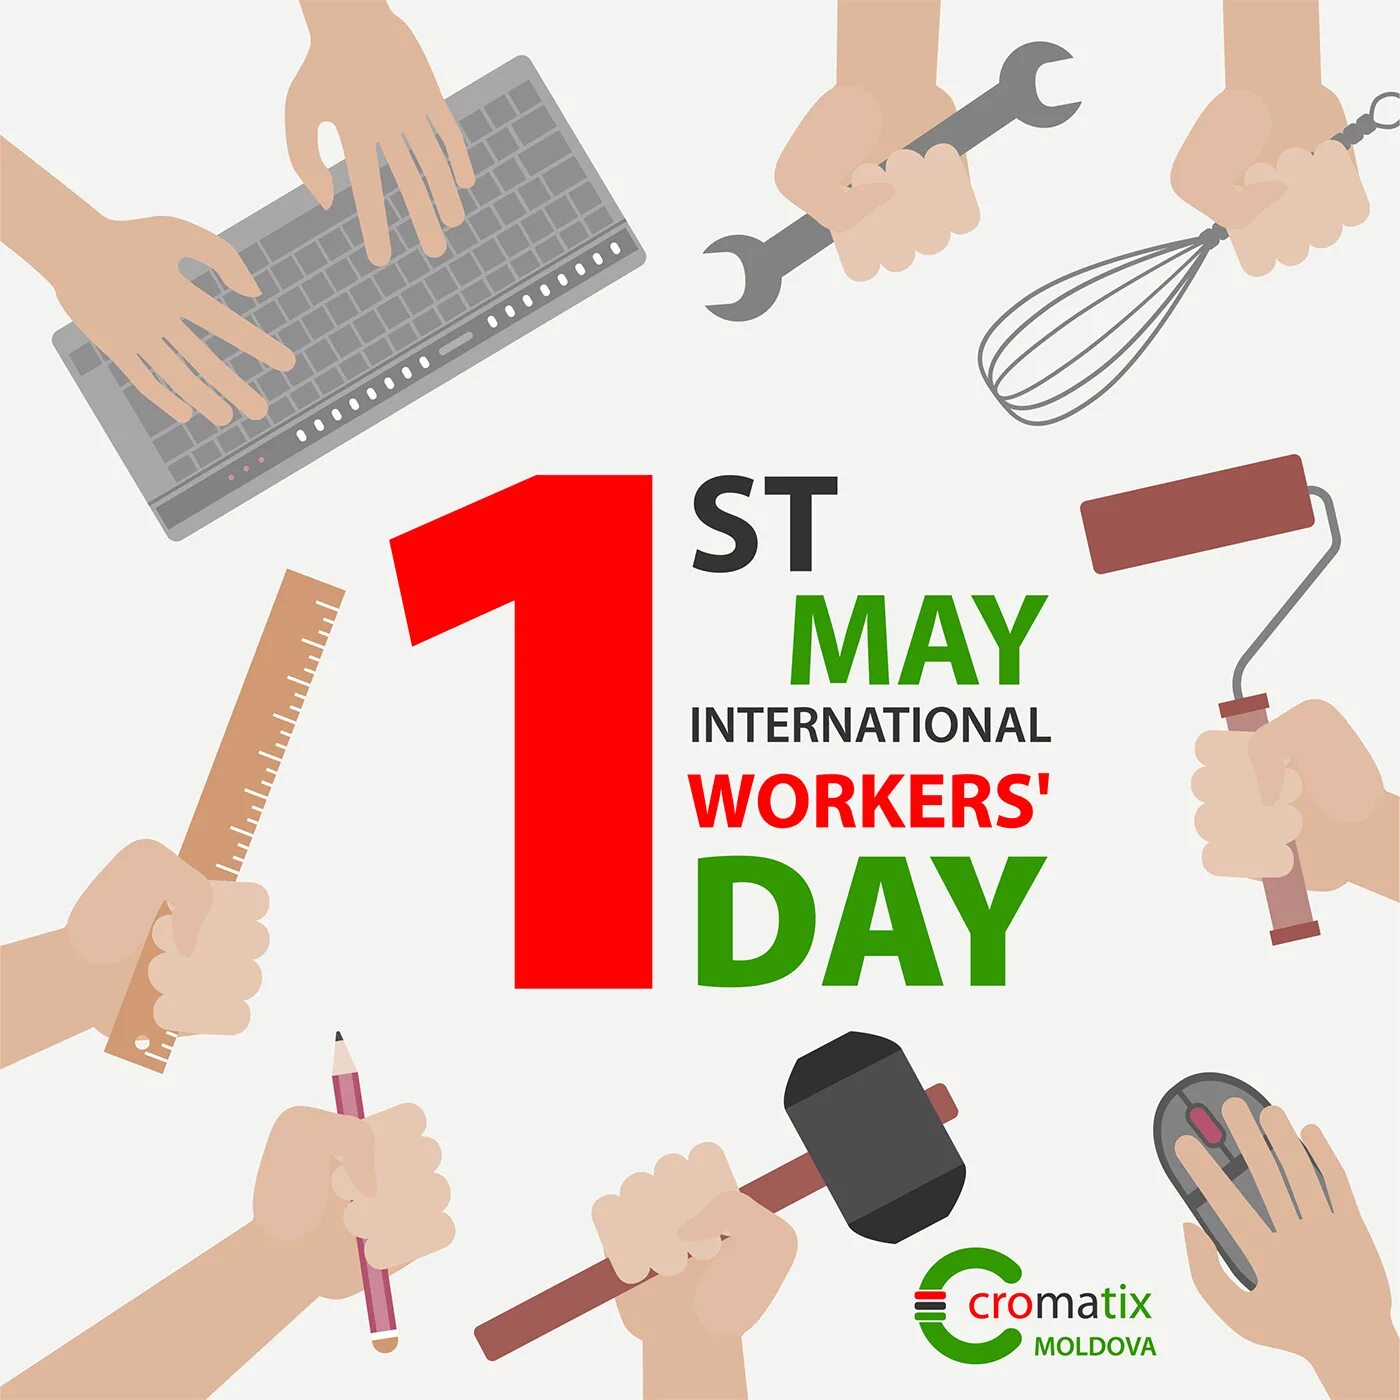 1 May International workers' Day. 1st May Labour Day. 1 May Labour Day. International workers Day 1 мая. Работа 1 5 мая